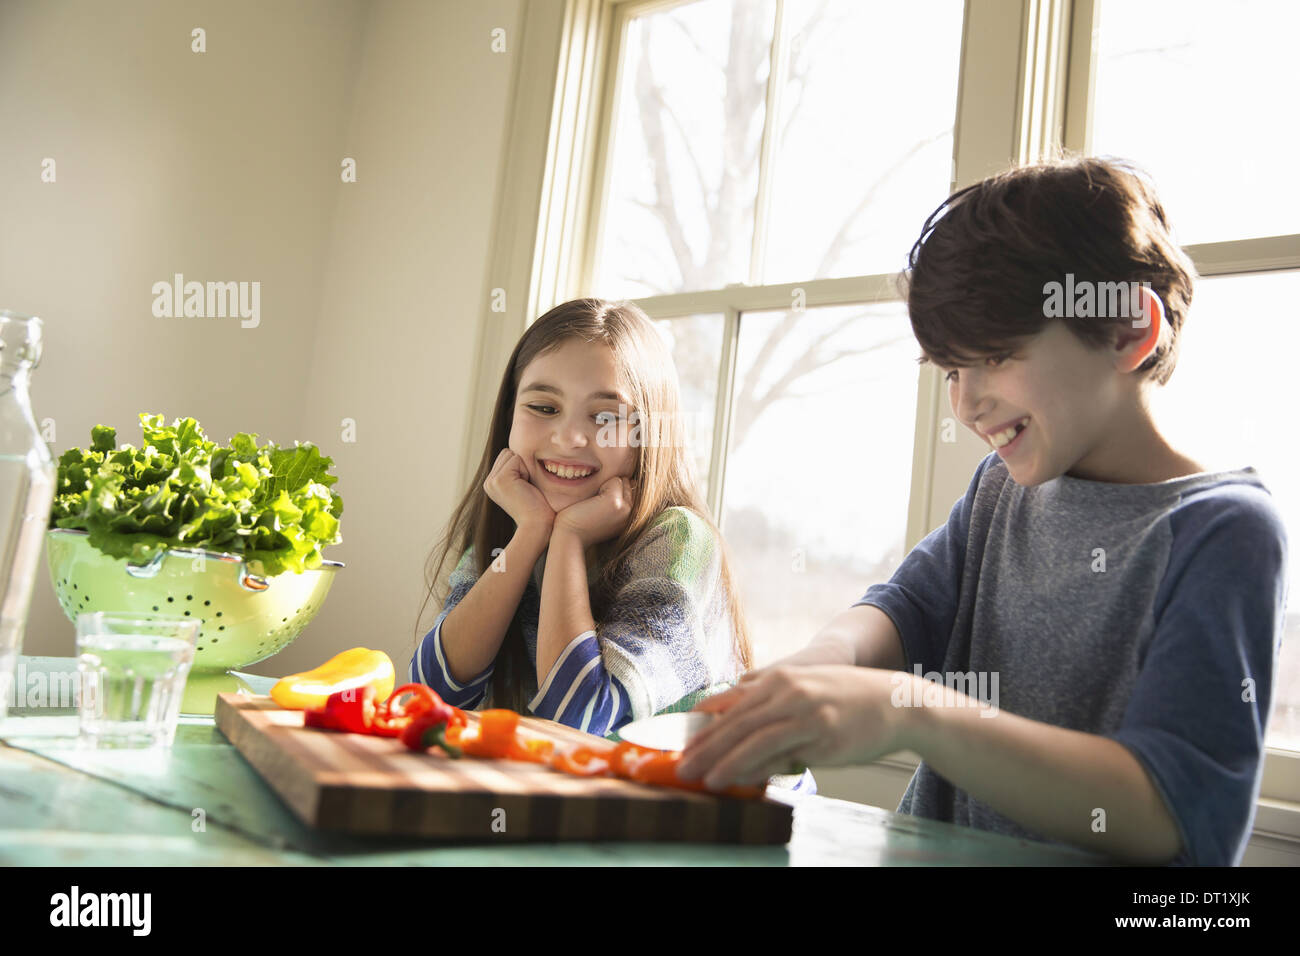 Two children sitting at a table A boy using a knife and chopping bell peppers on a board Stock Photo